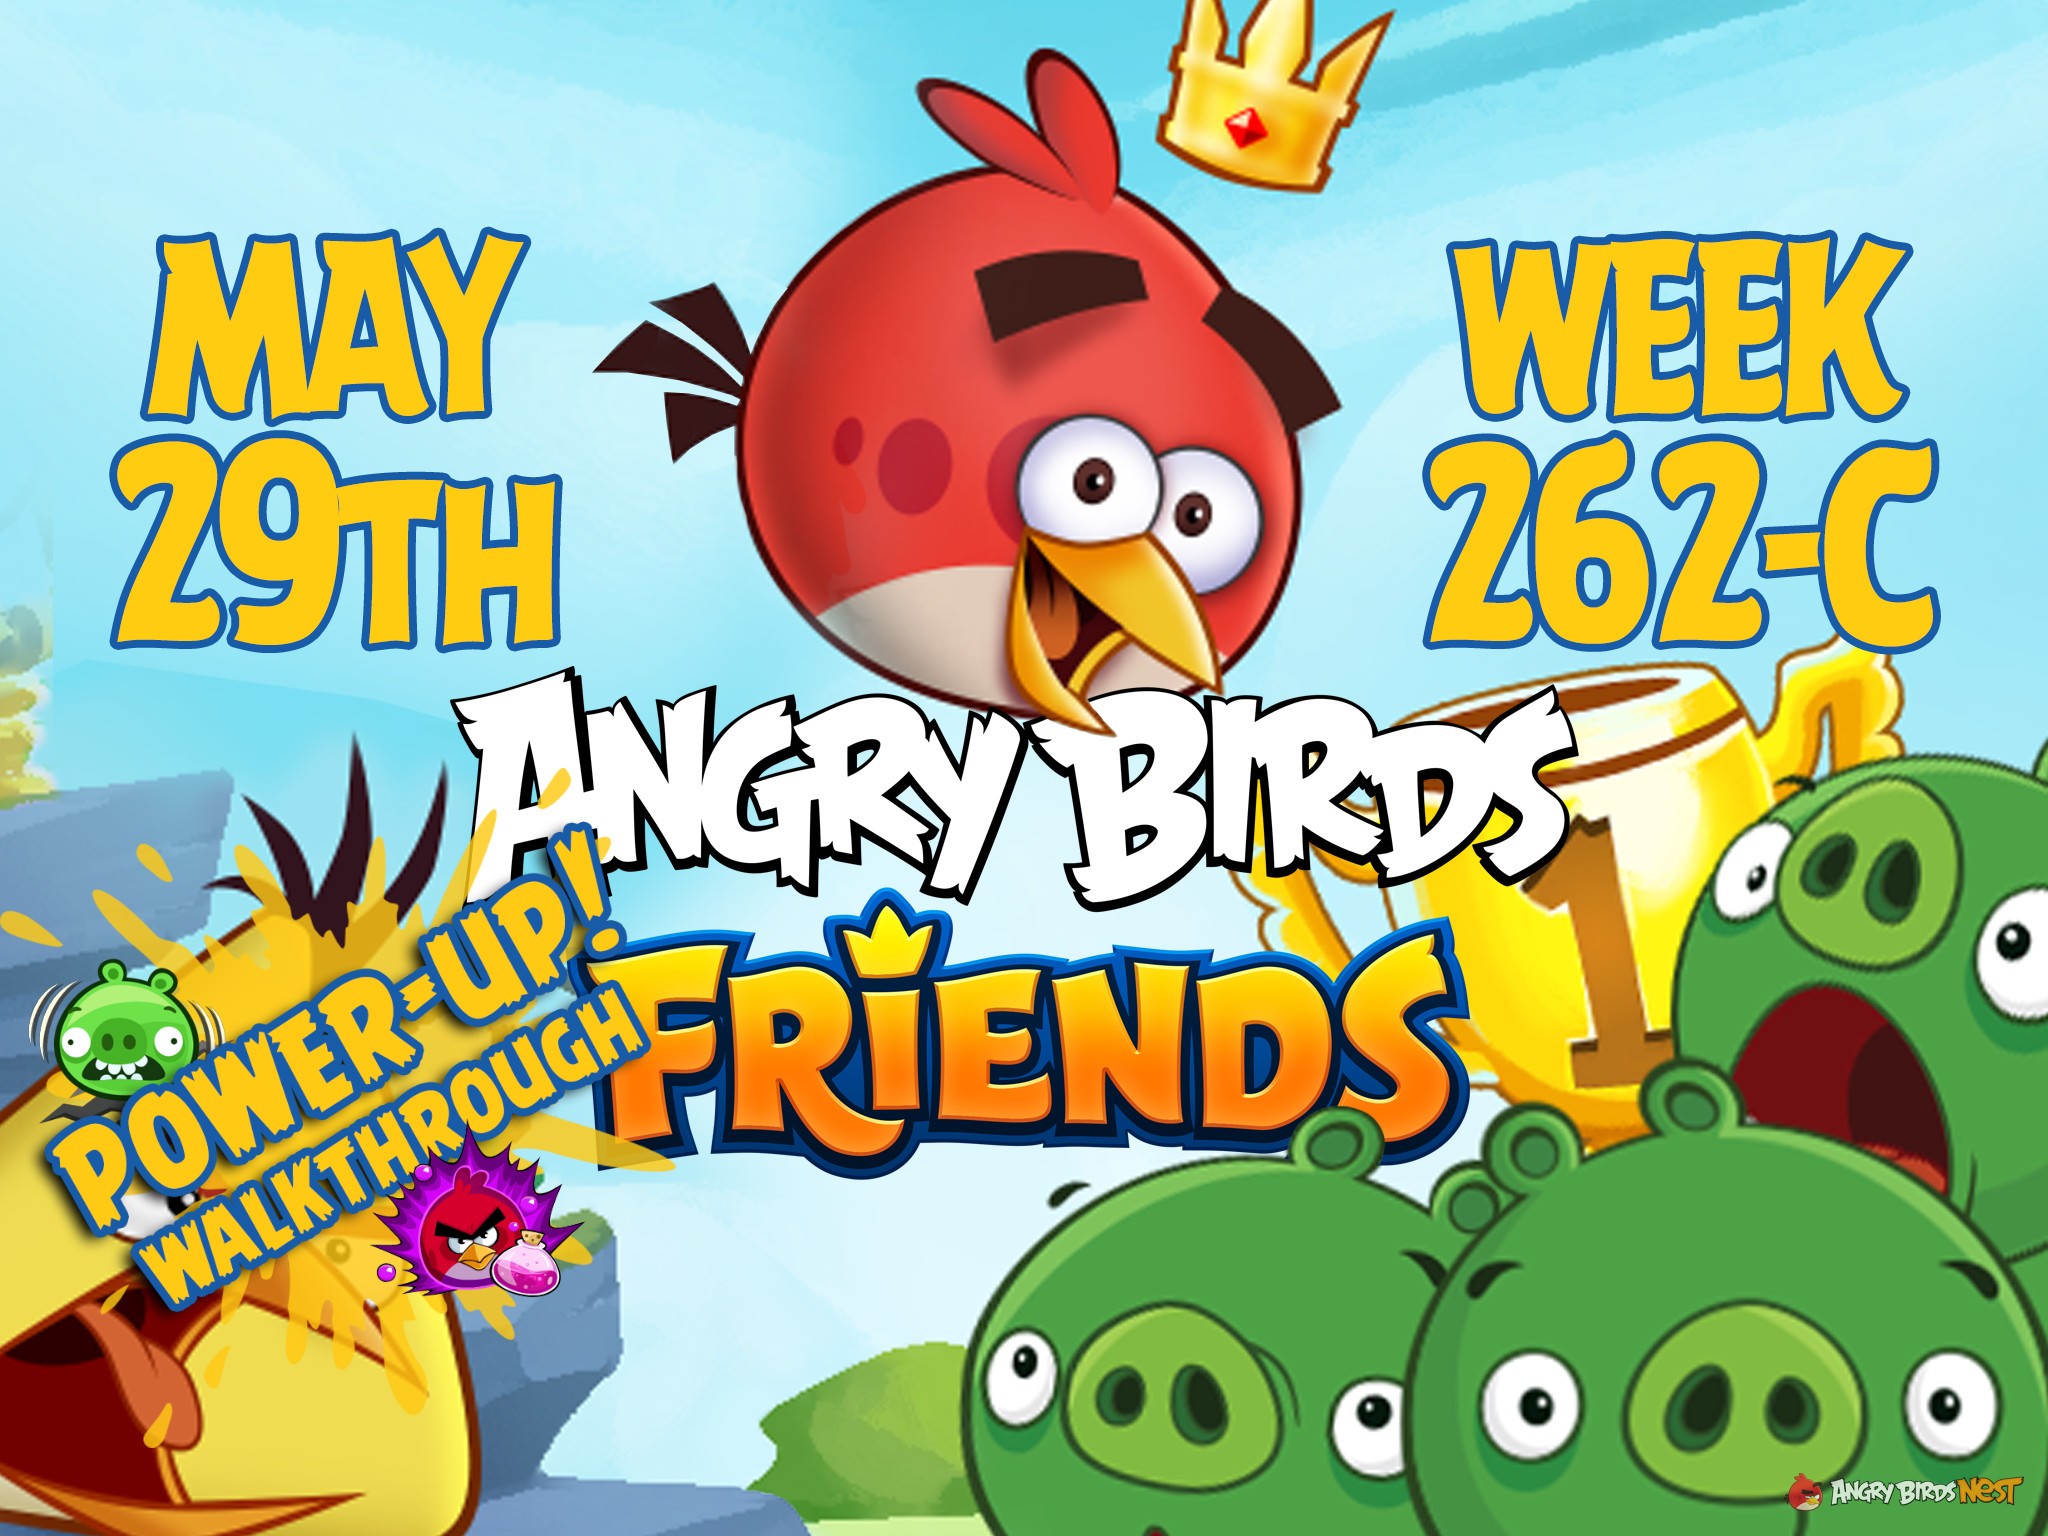 Angry Birds Friends Tournament Week 262-C Feature Image PU